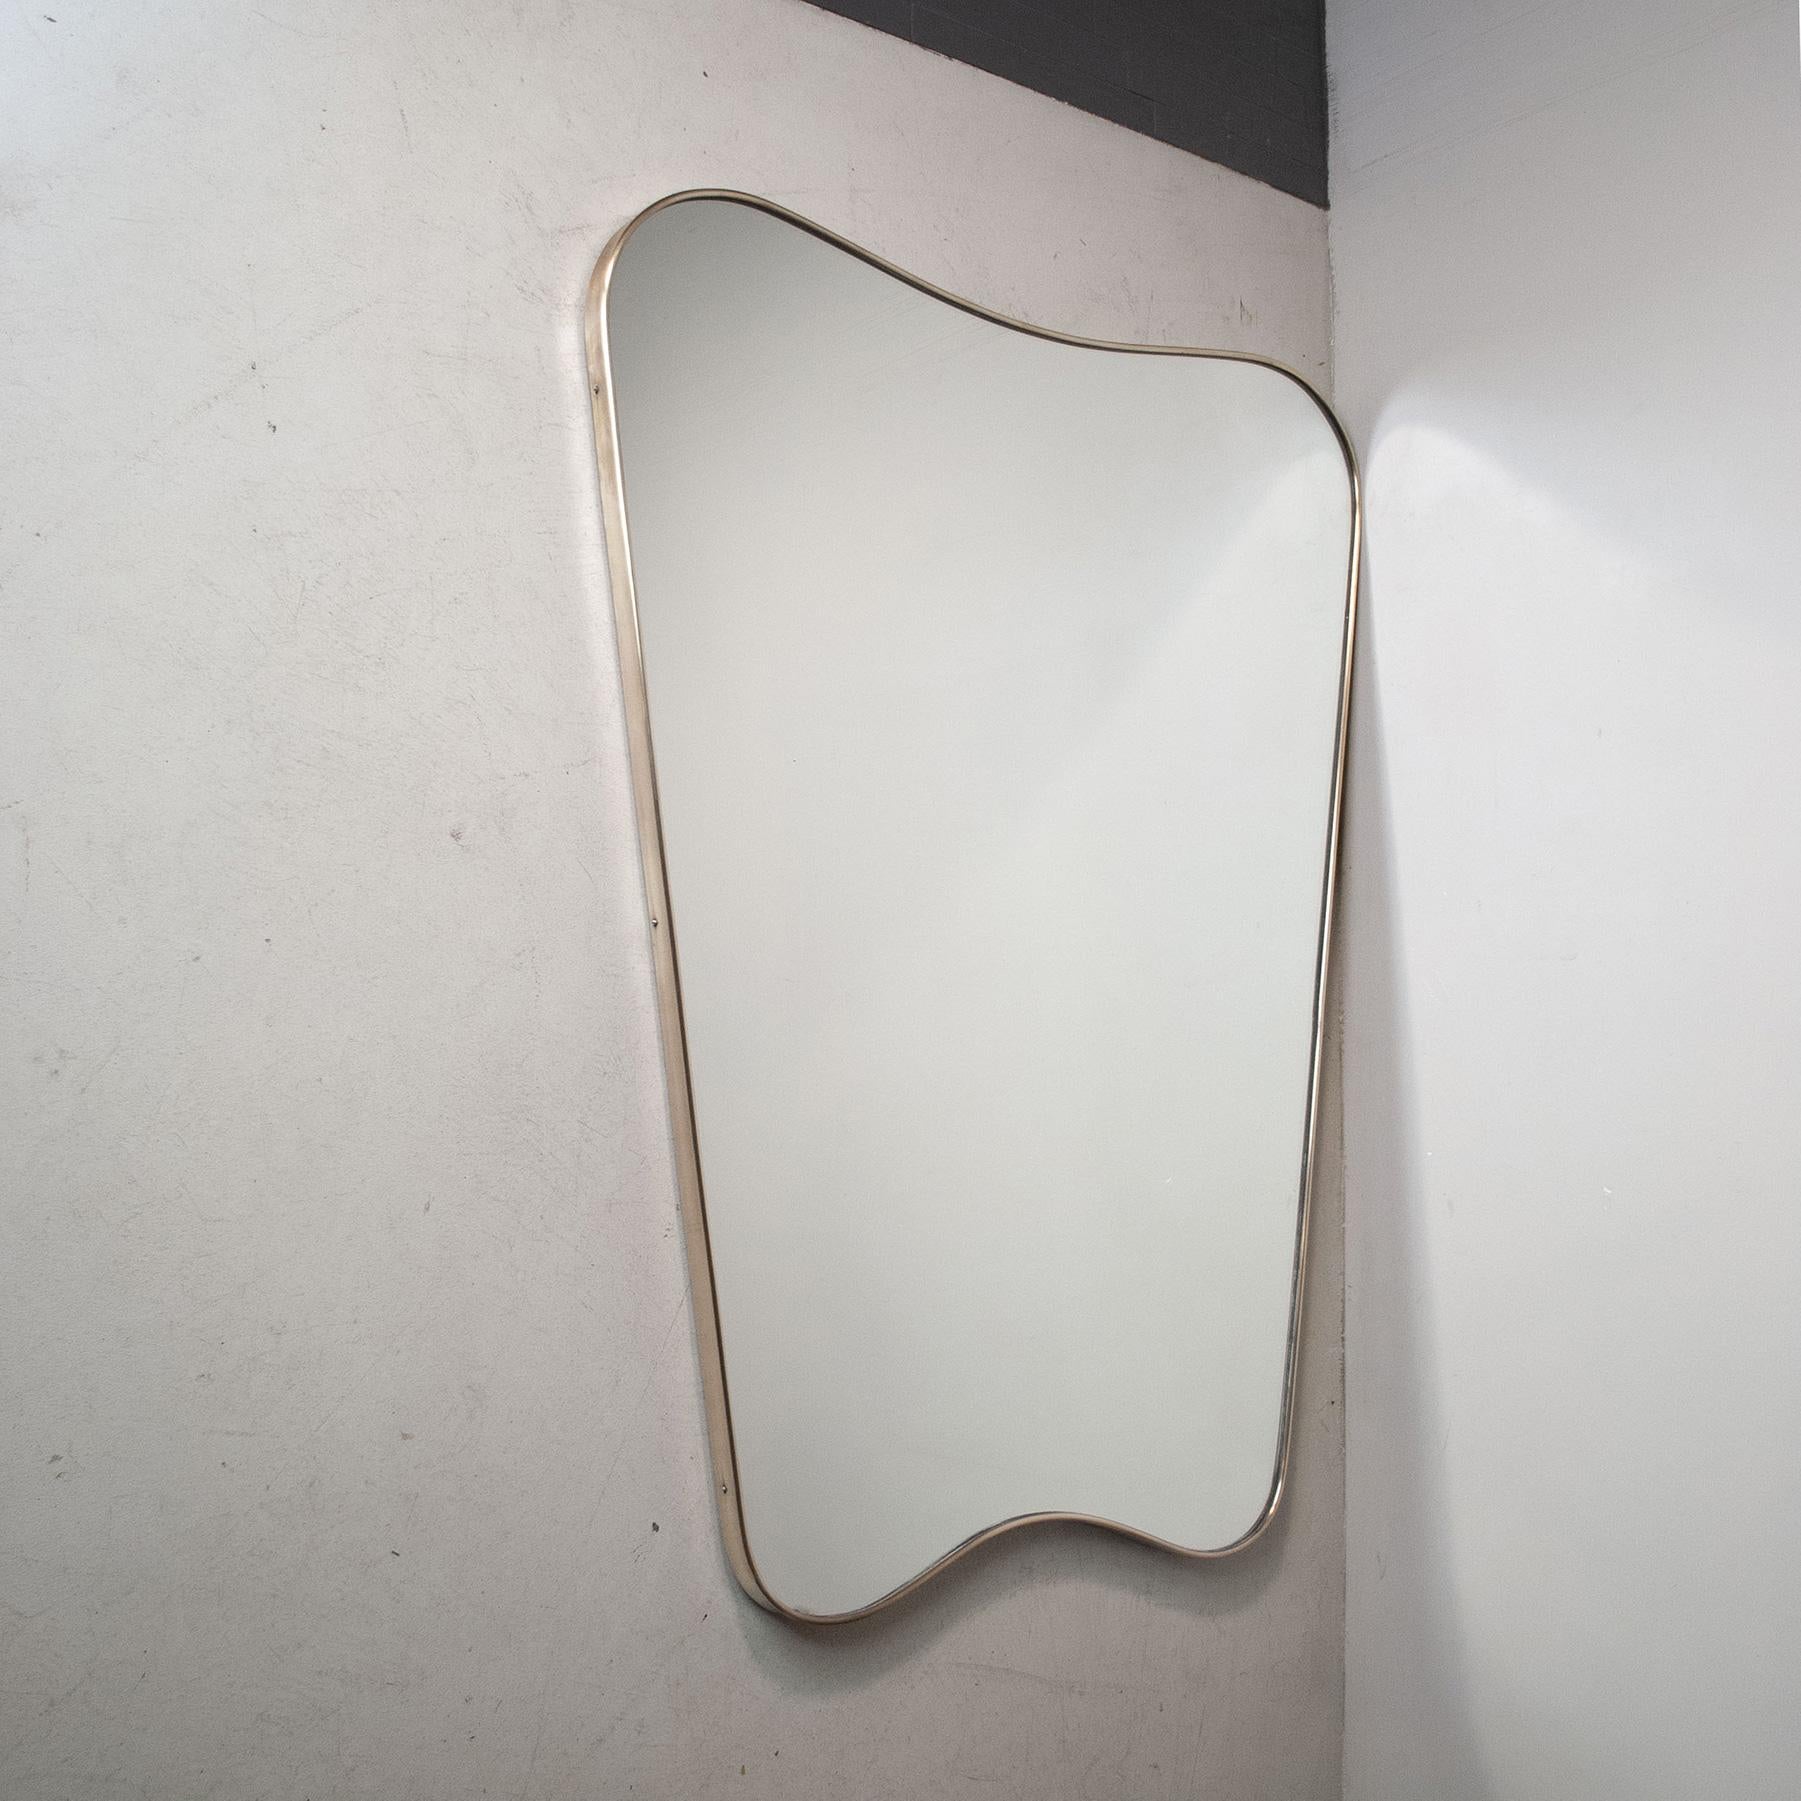 Stunning mirror of exceptional size for the type brass frame years in the Gio Ponti 1950s style.